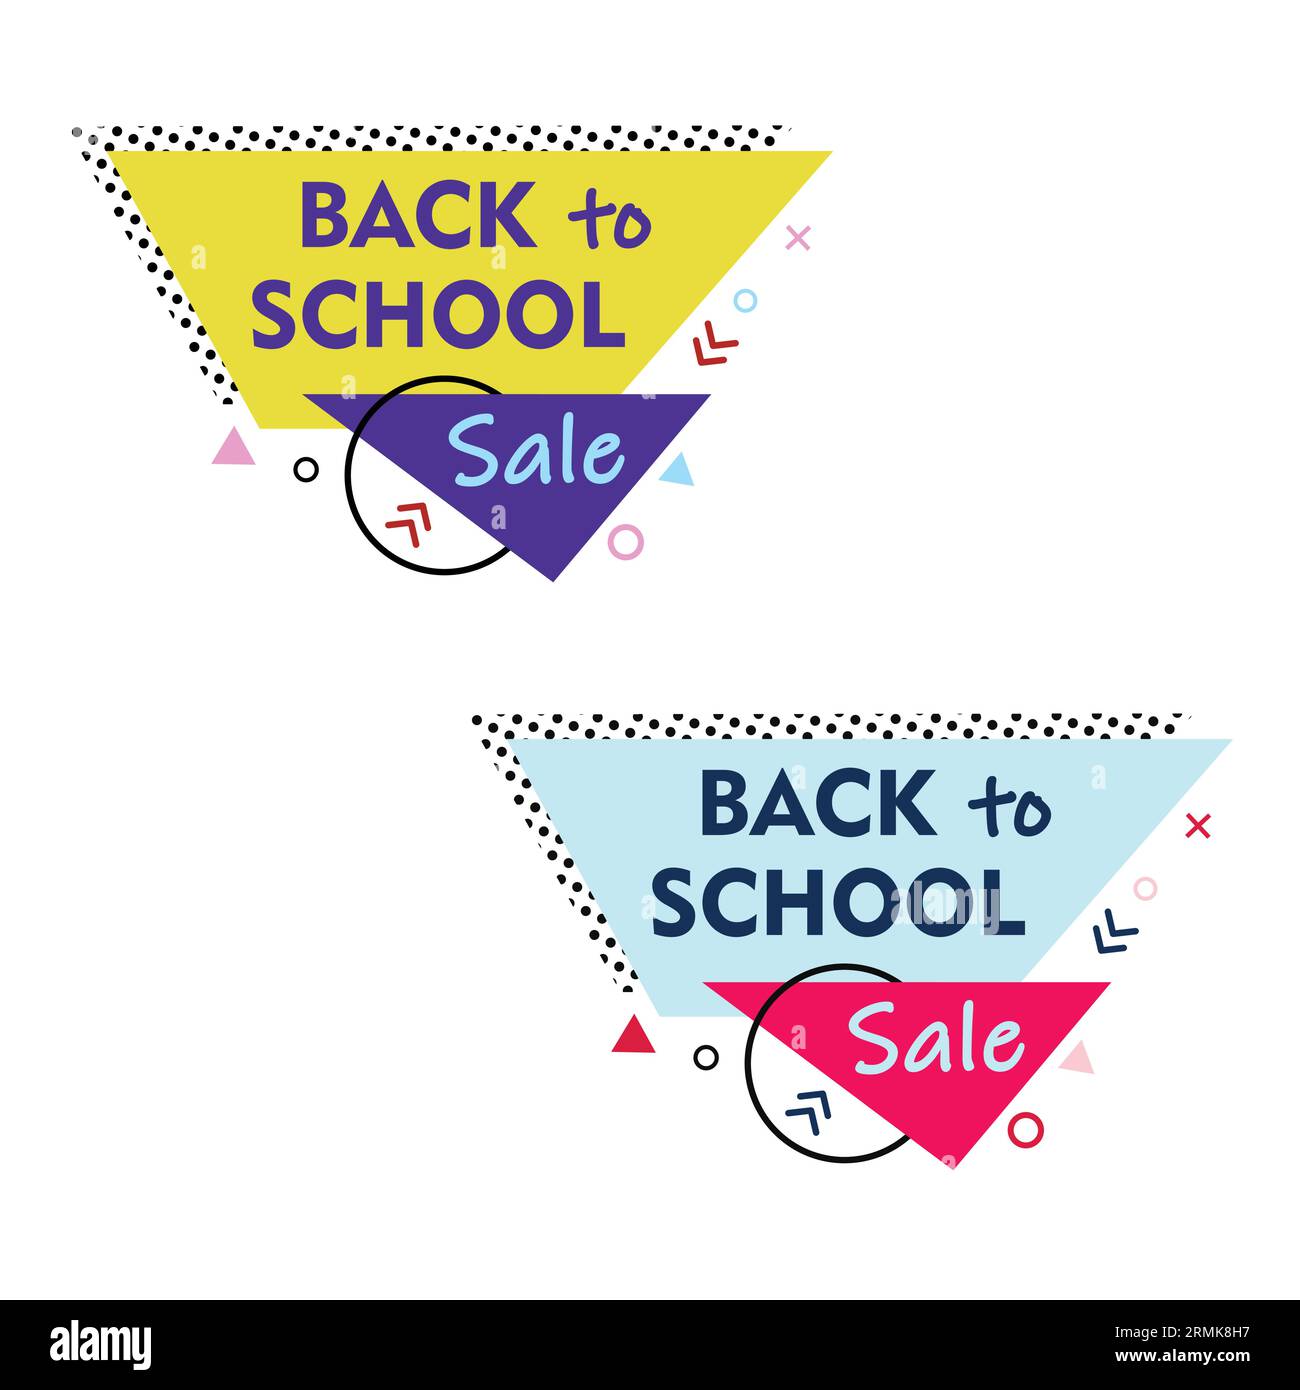 Back to school sale stickers in Memphis style with yellow, purple, blue, pink, red and black colors Stock Vector